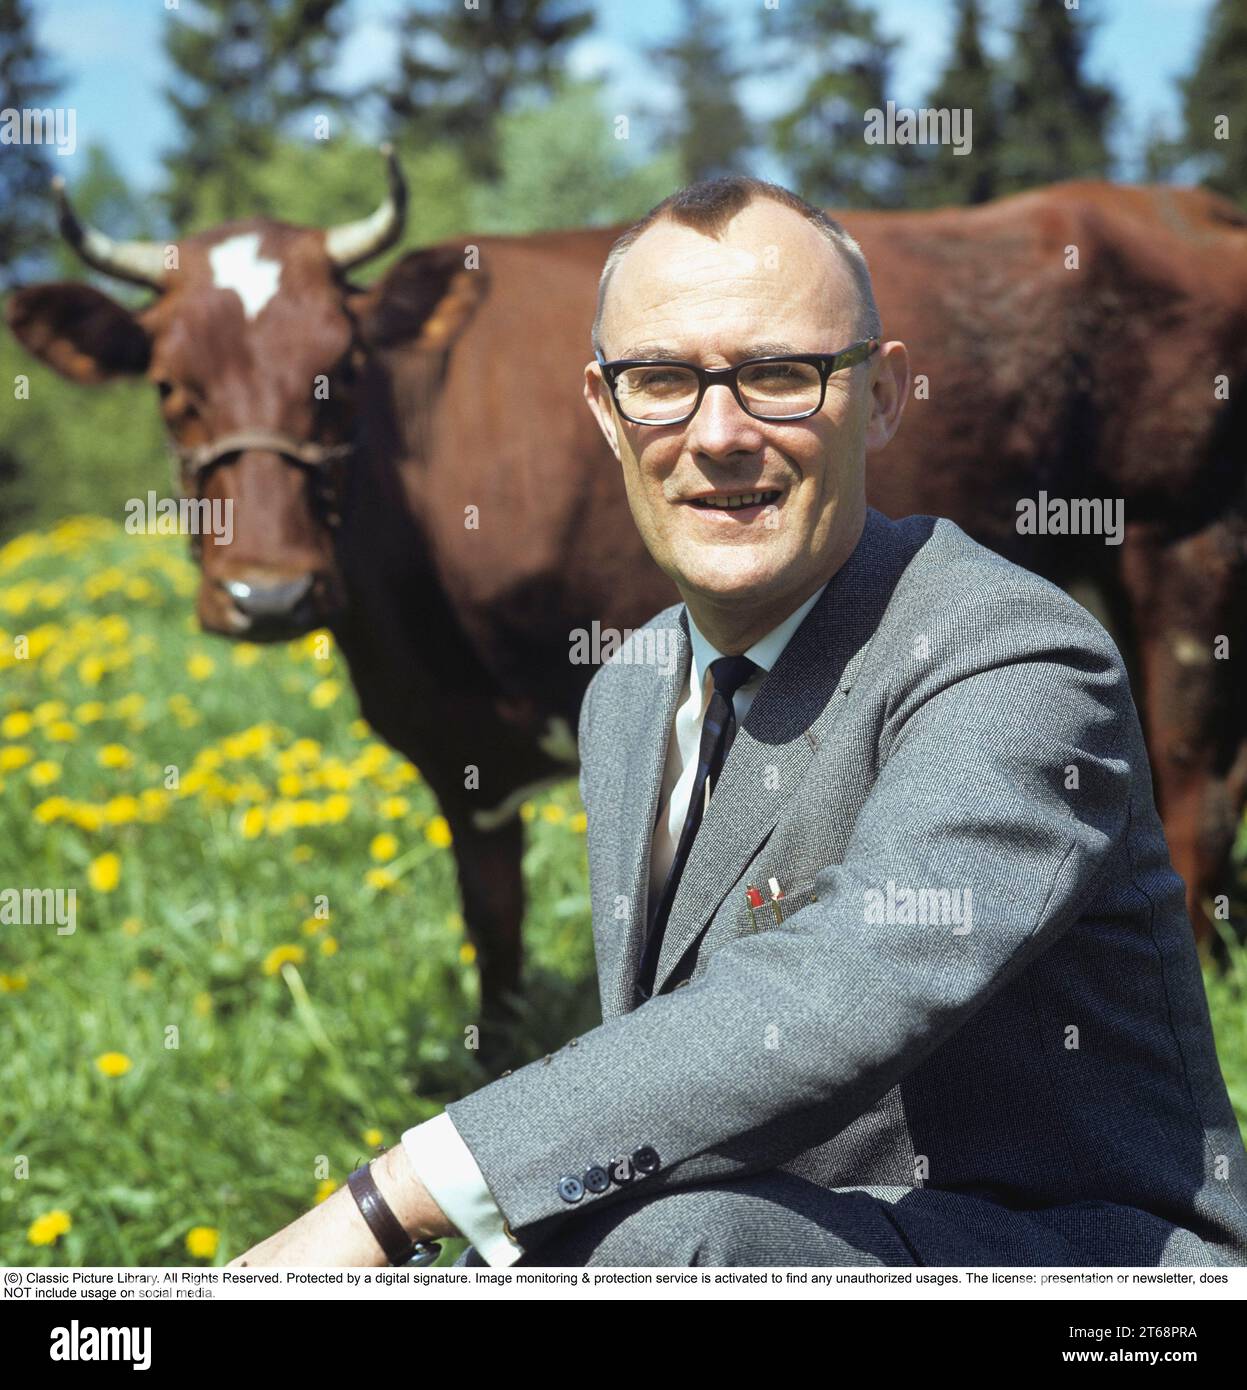 Feodor Ingvar Kamprad. 30 March 1926 – 27 January 2018) was a Swedish billionaire business magnate best known for founding IKEA, a multinational retail company specialising in furniture. Pictured outside his home town of Älmhult Småland Sweden 1968. Roland Palm ref 2-11-4 Stock Photo